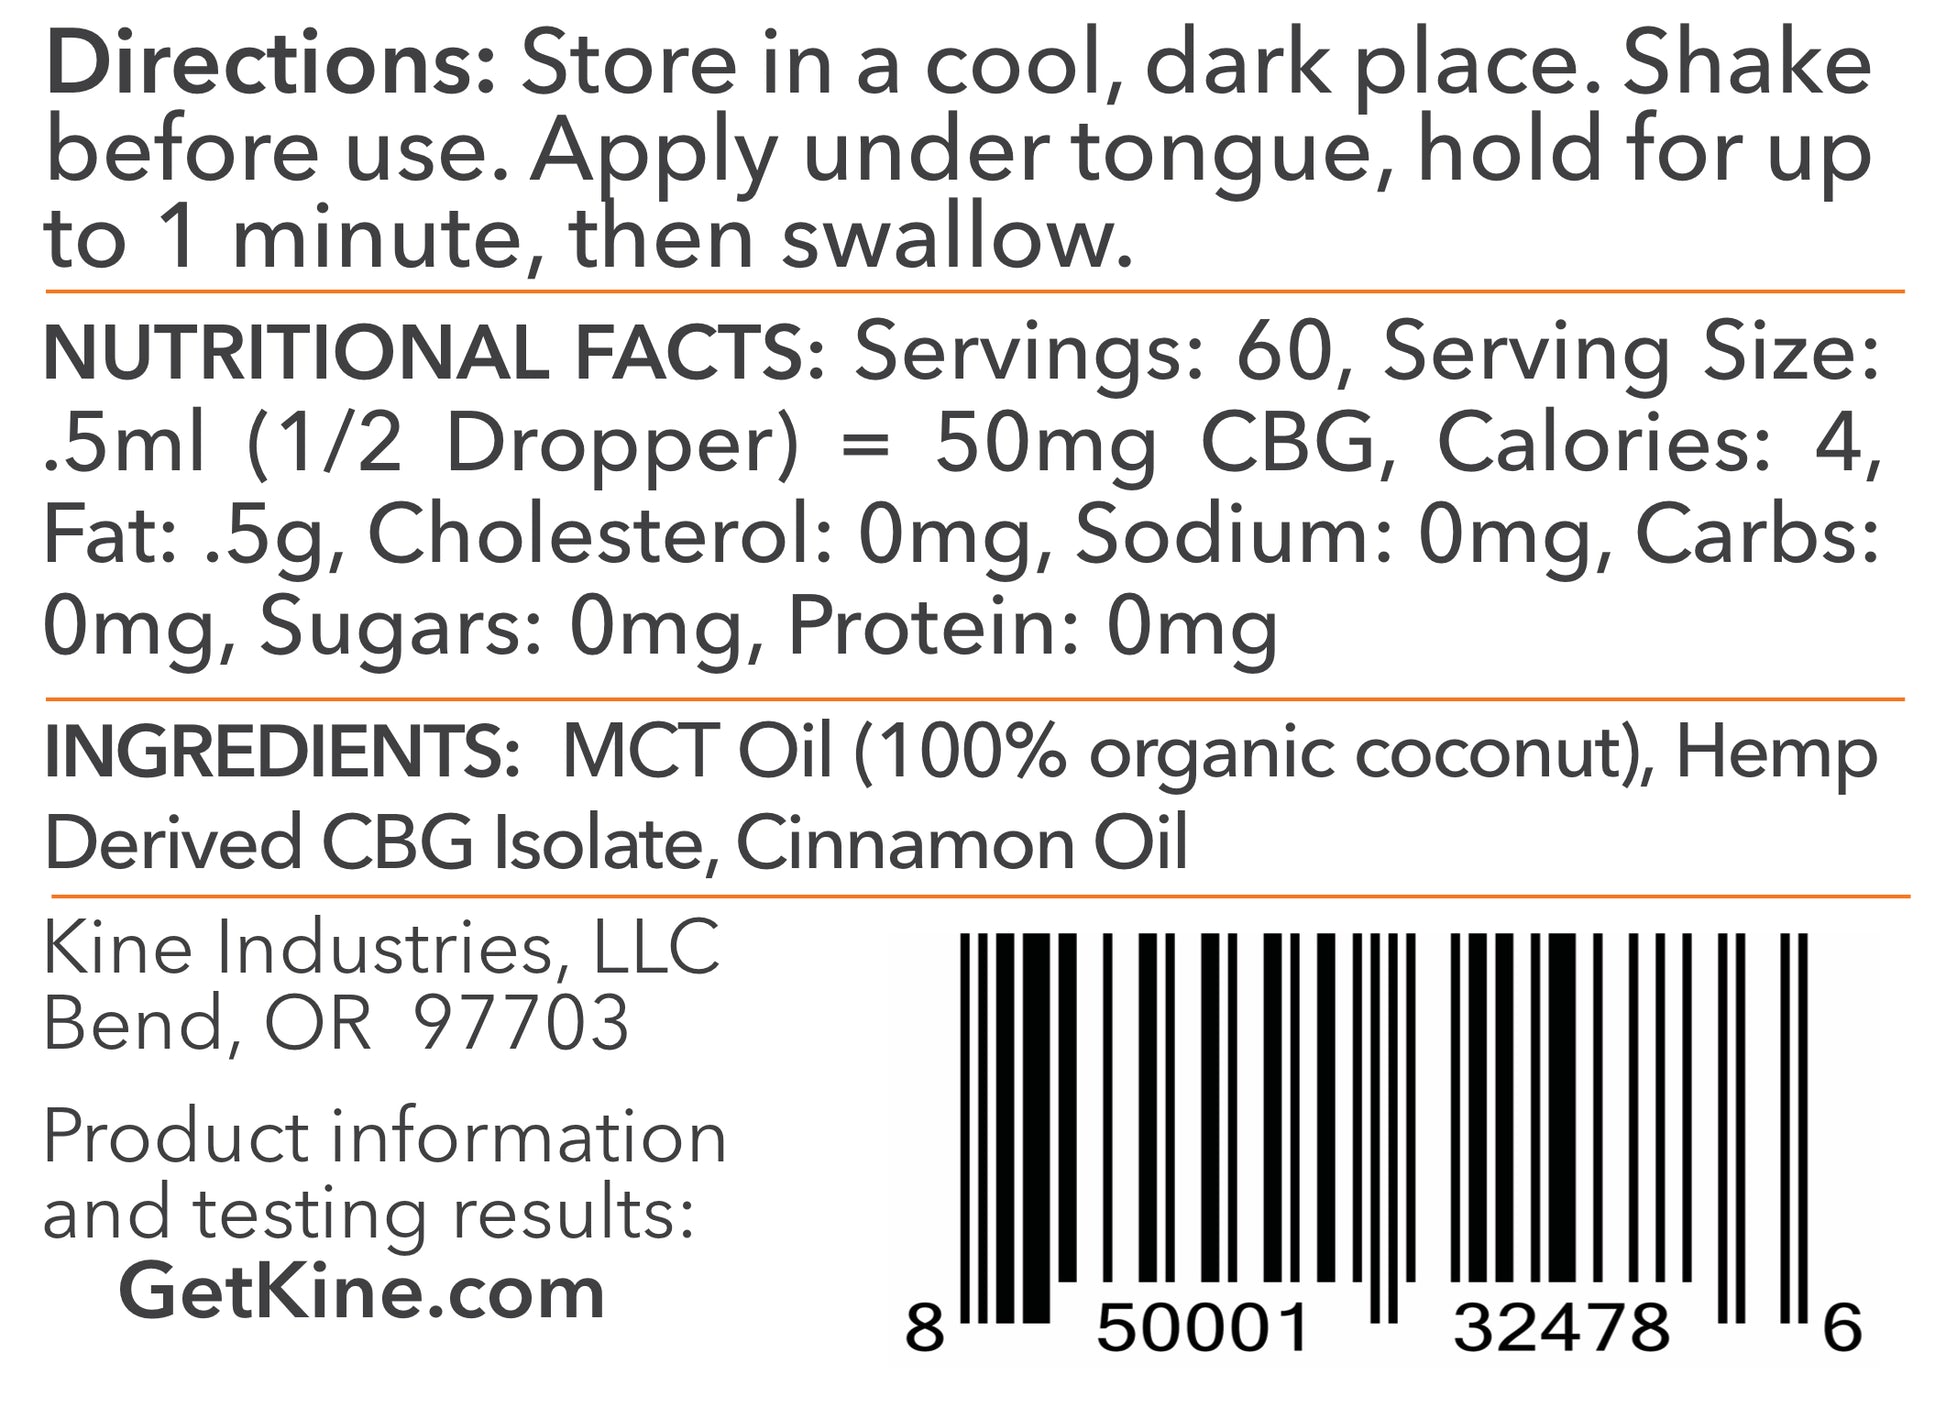 Kine Red Hot Cinnamon Flavored Organic CBG 3000mg tincture drops ingredients list and nutritional facts